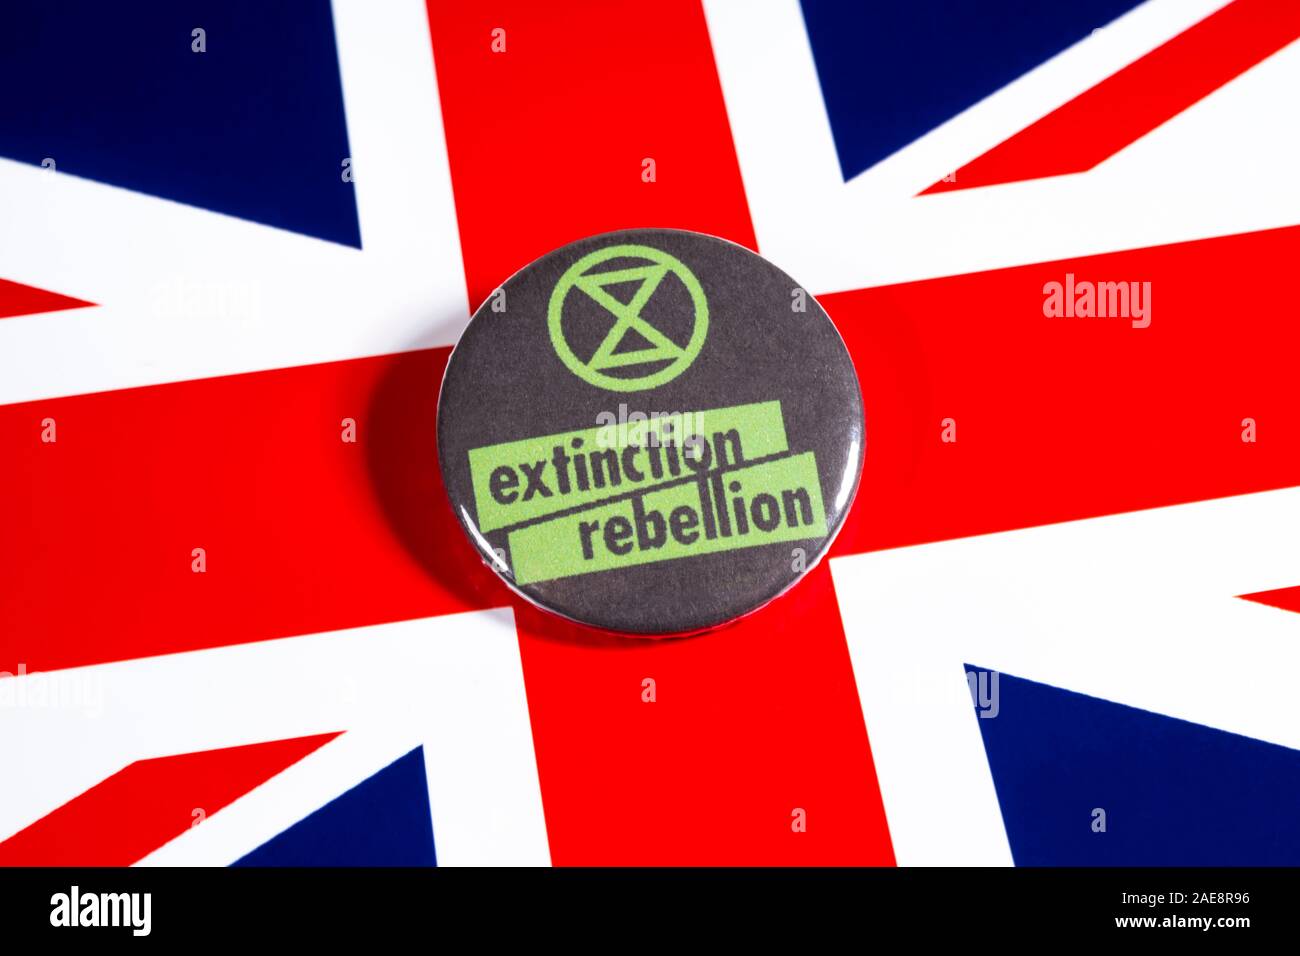 London, UK - November 22nd 2019: The symbol of Extinction Rebellion - the global environmental movement, pictured over the flag of the United Kingdom. Stock Photo